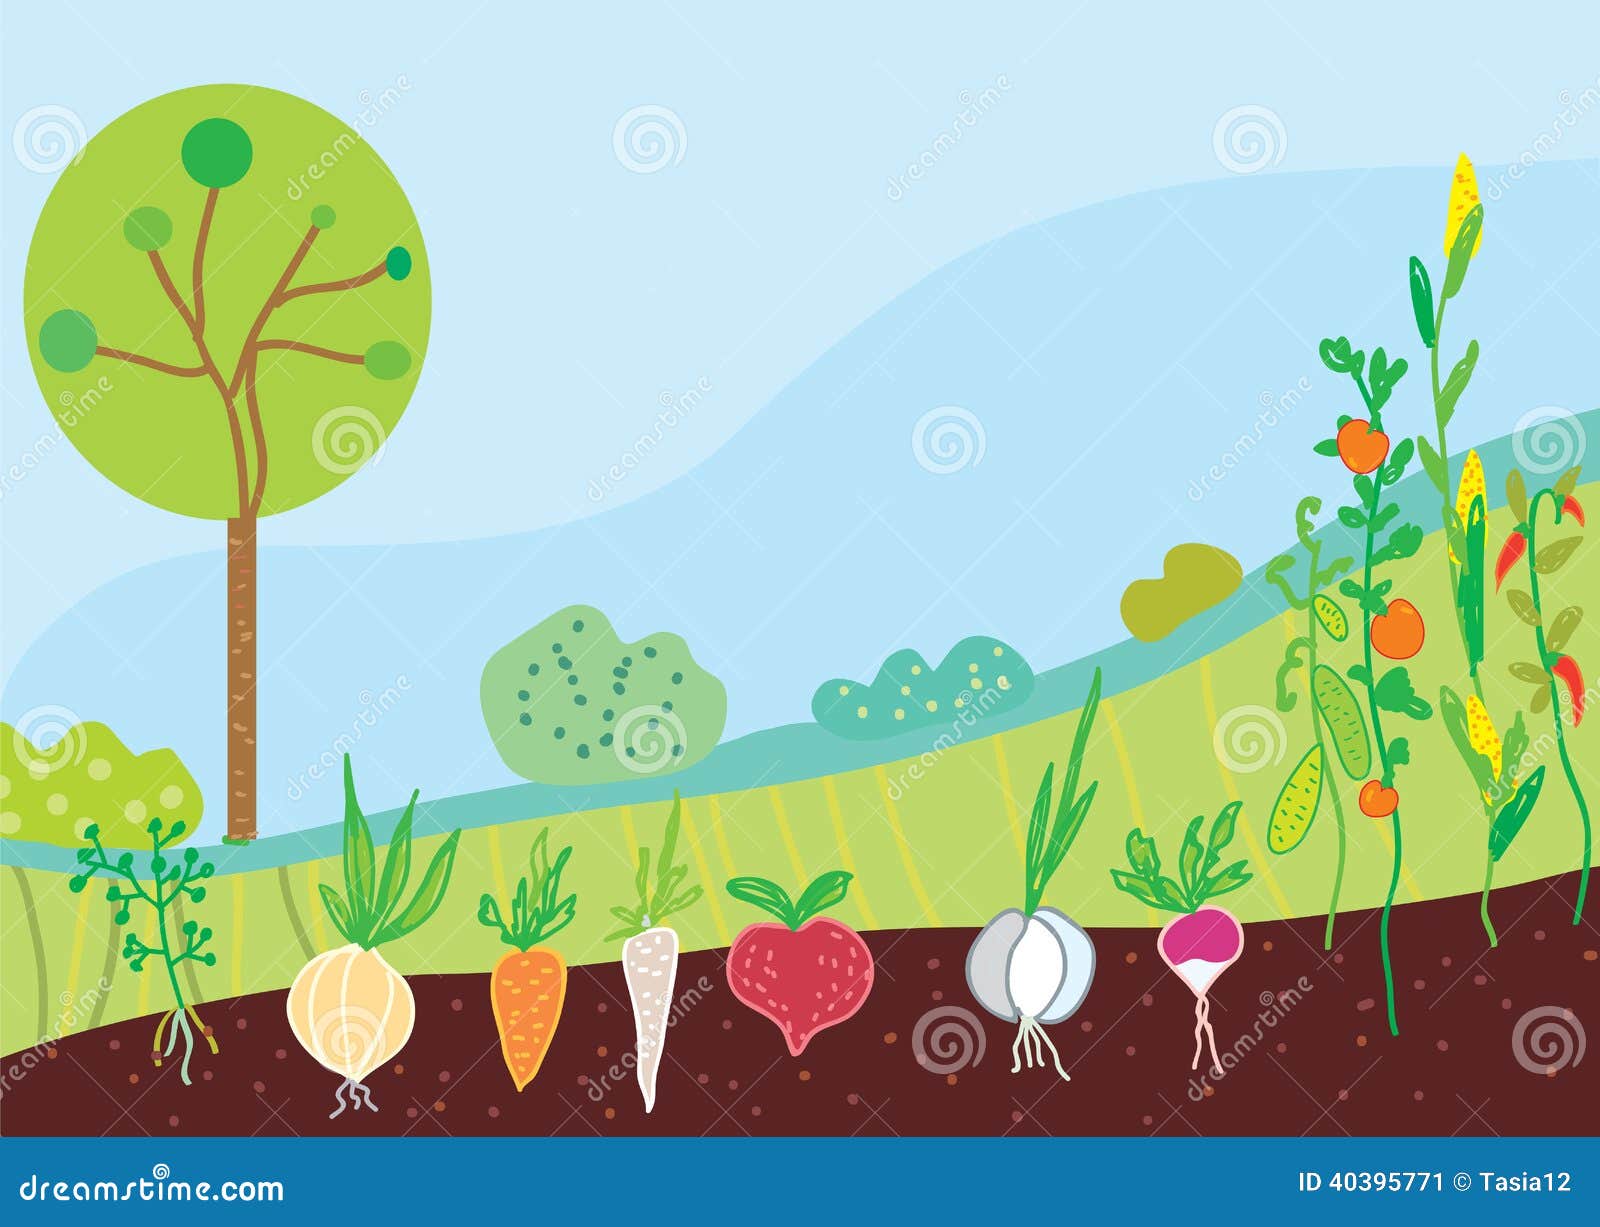 Garden In Spring With Vegetables Stock Vector - Image ...
